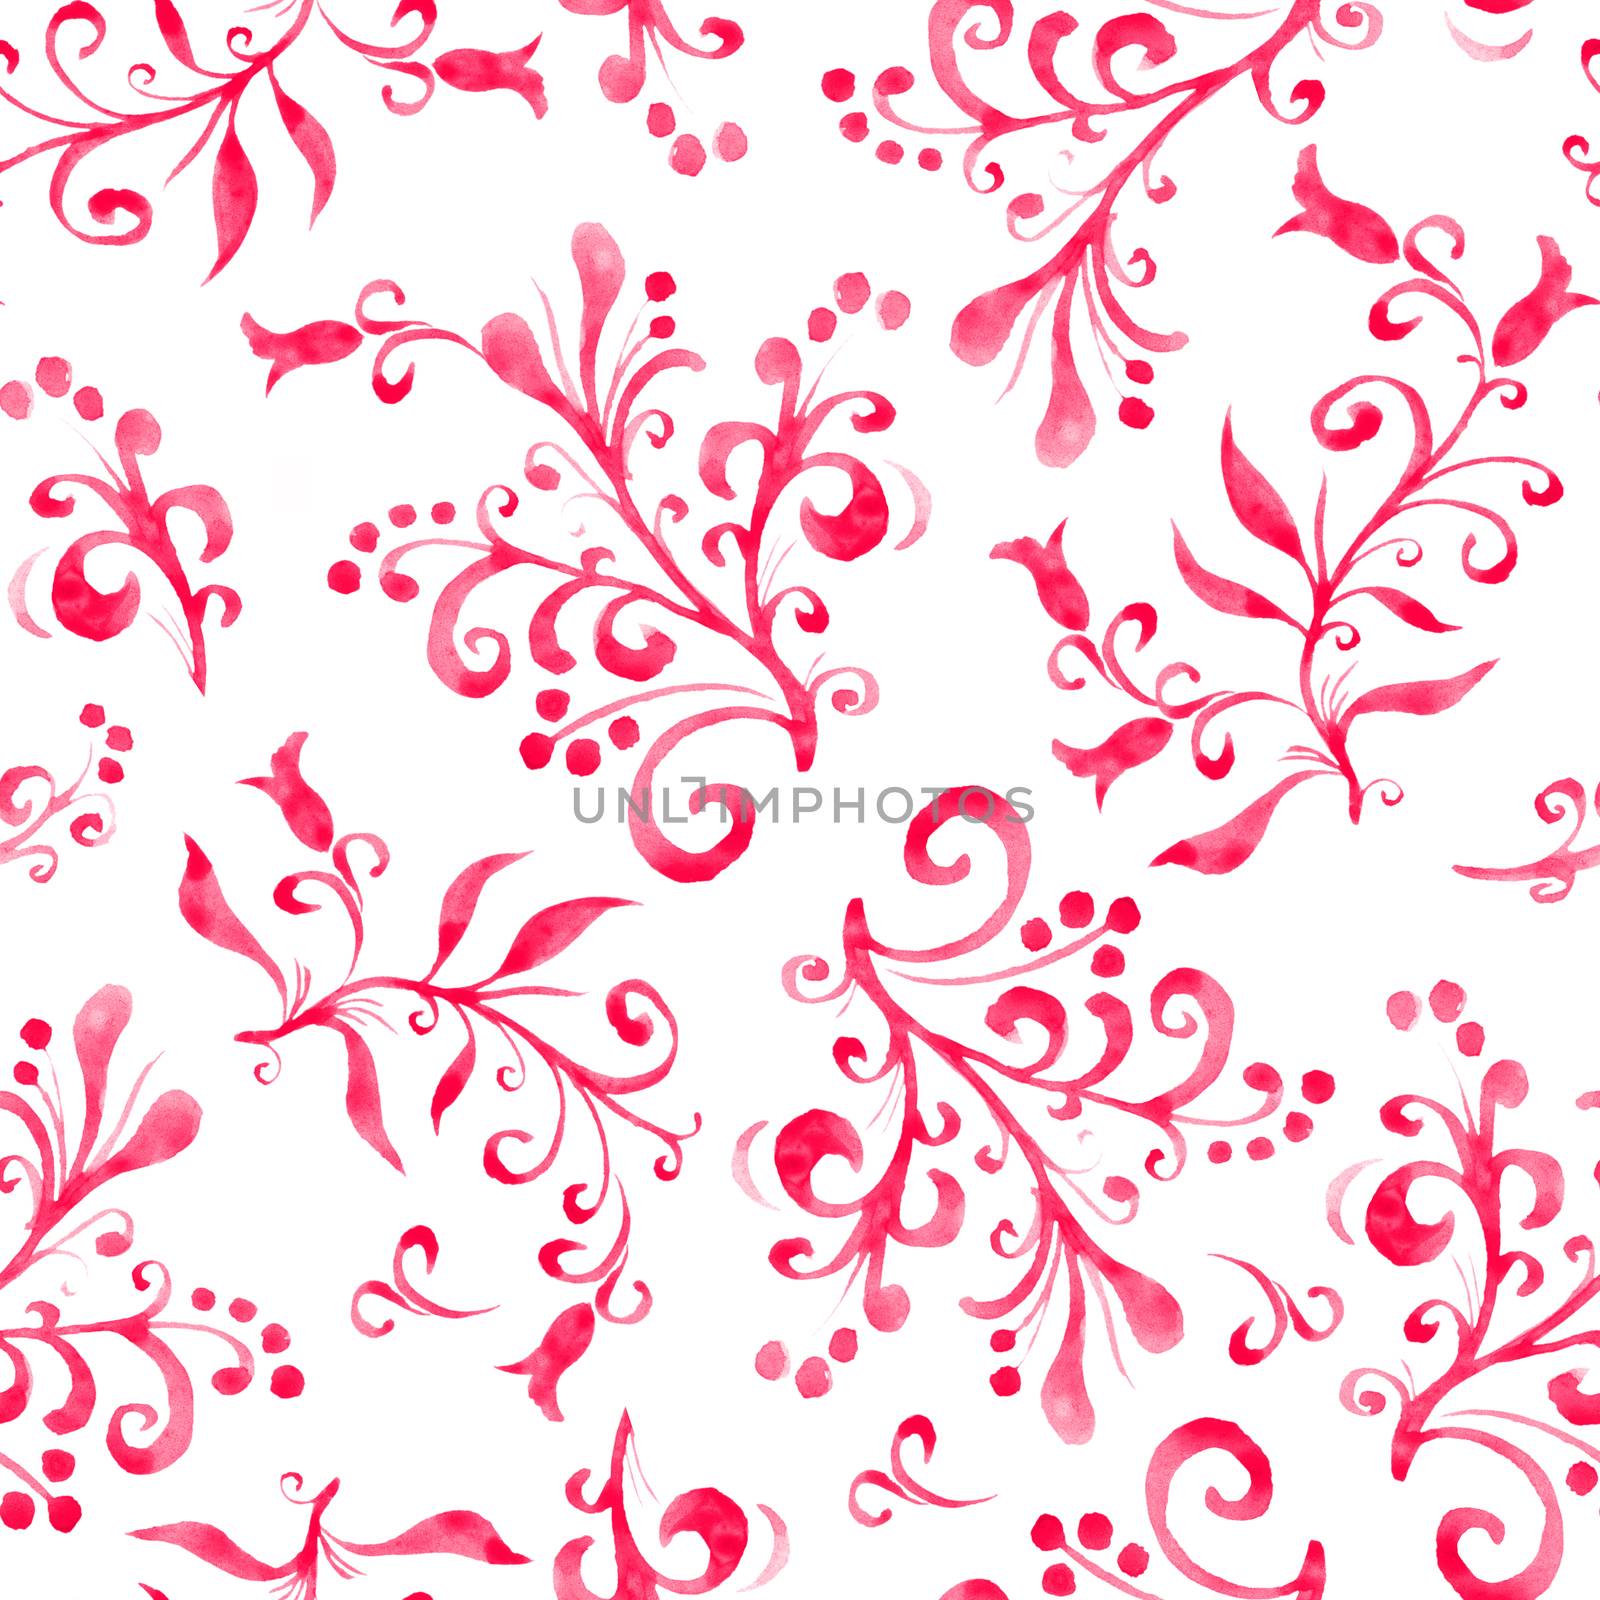 Floral seamless pattern with leaves and berries. Hand drawing. Background for cover, image for blog, design for wallpapers, textiles, fabrics.